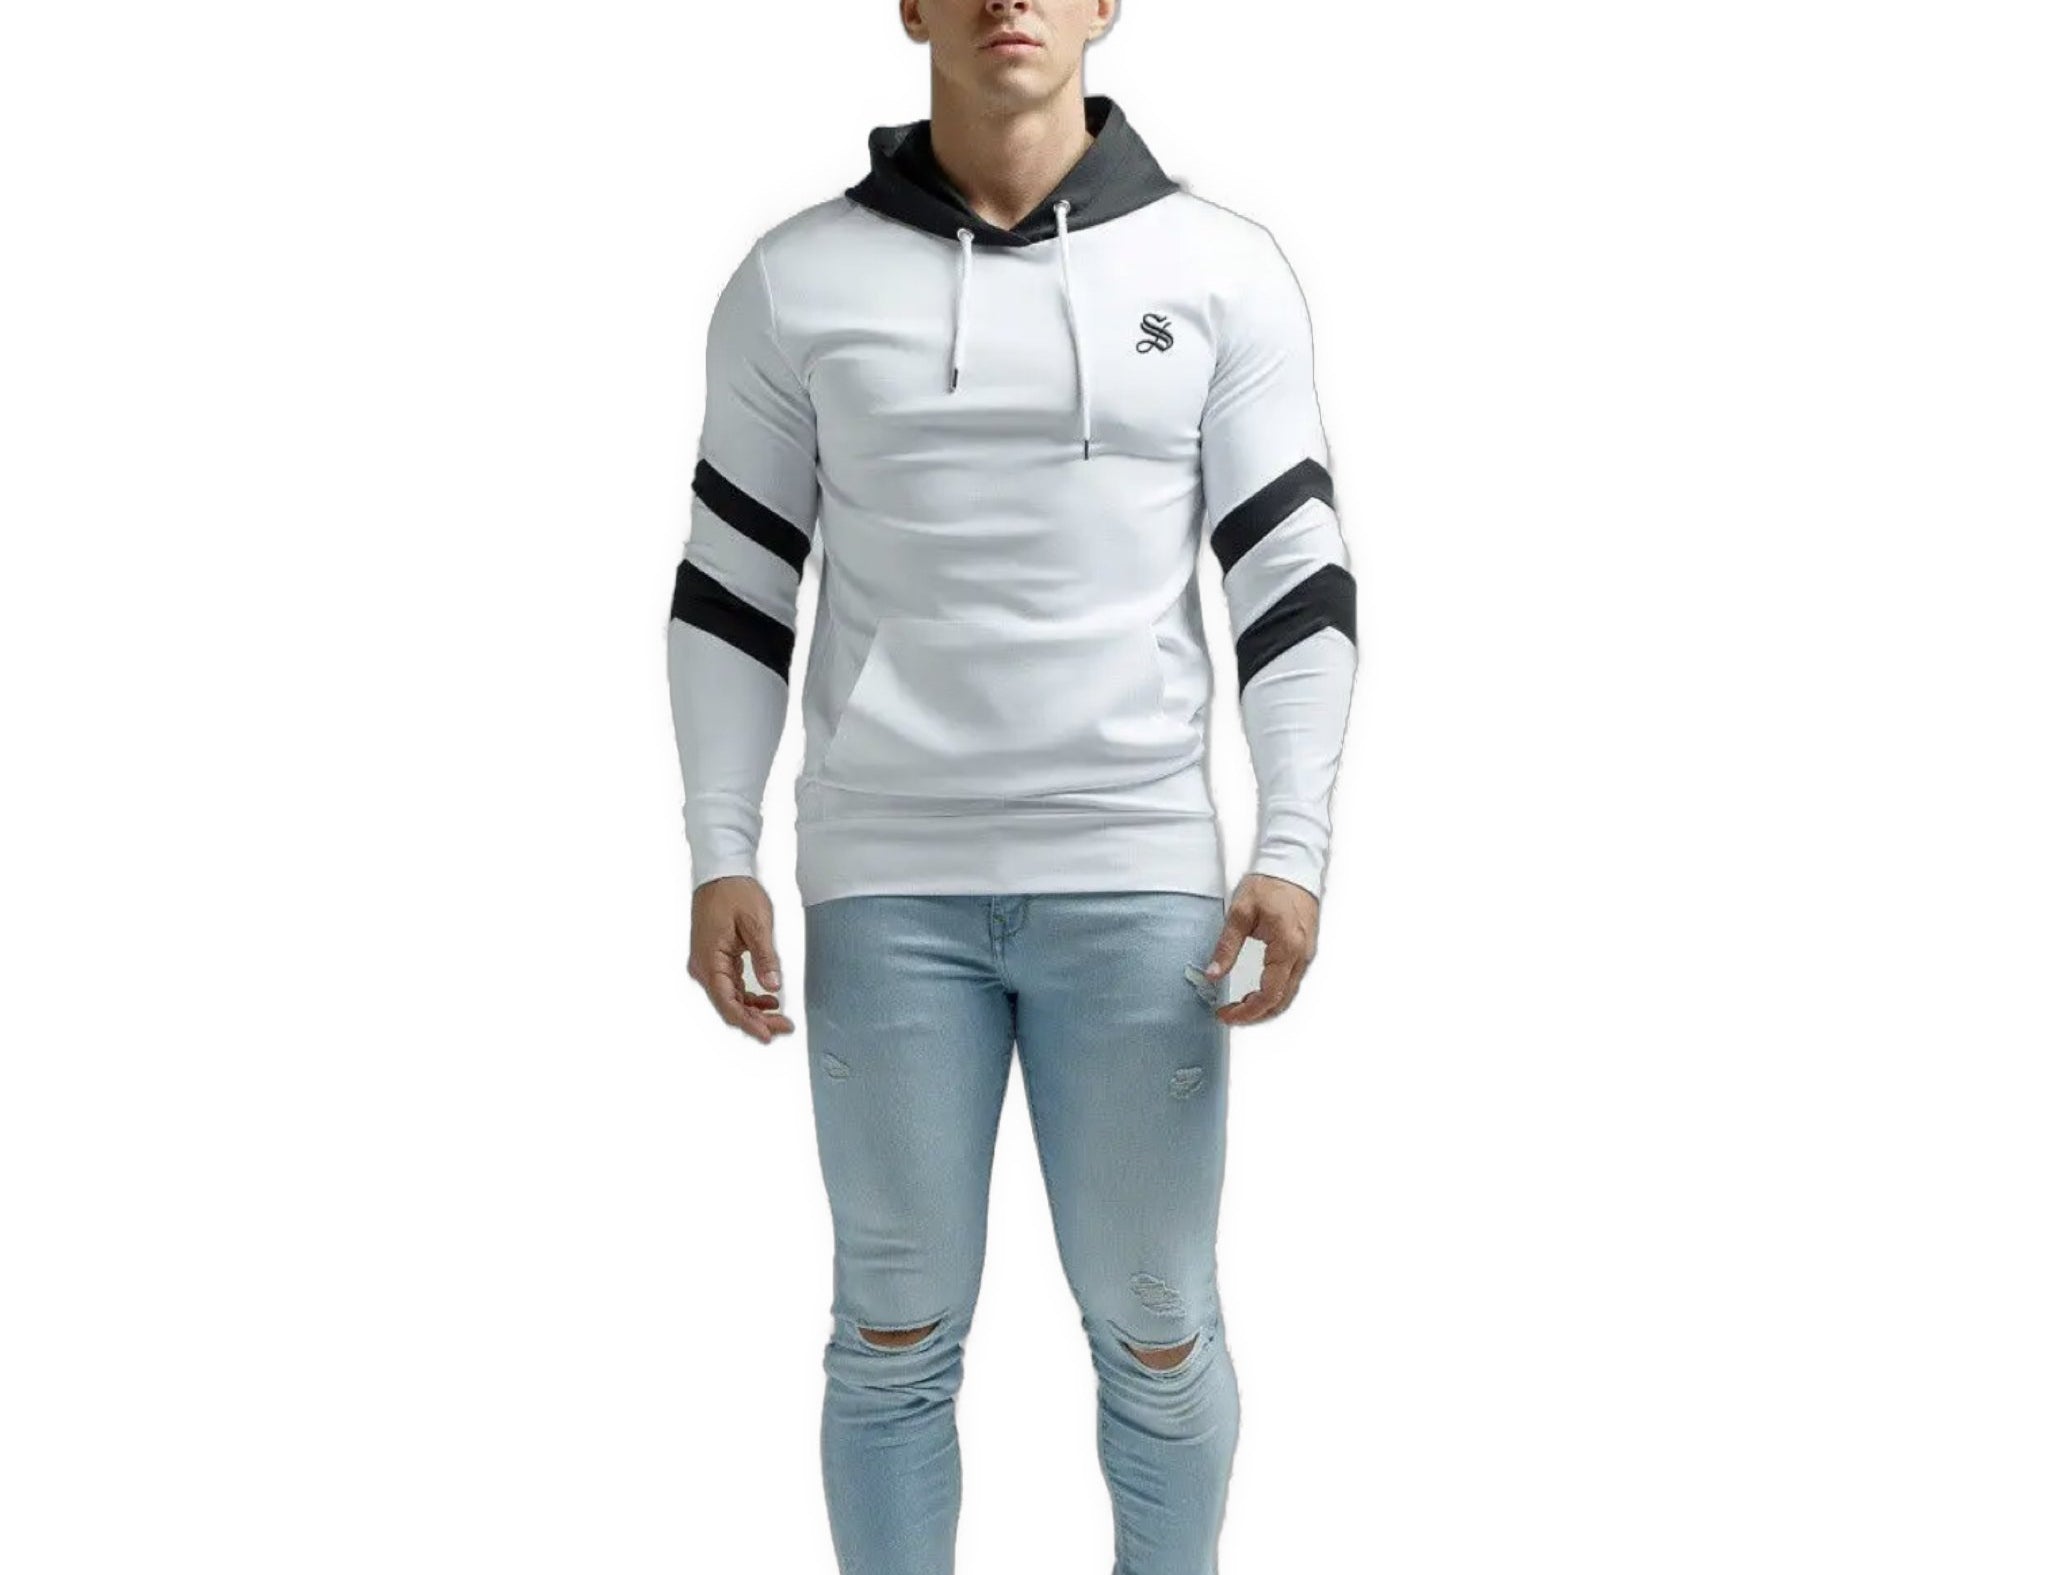 Cloudy - White/Black Hoodie for Men (PRE-ORDER DISPATCH DATE 25 September 2024) - Sarman Fashion - Wholesale Clothing Fashion Brand for Men from Canada